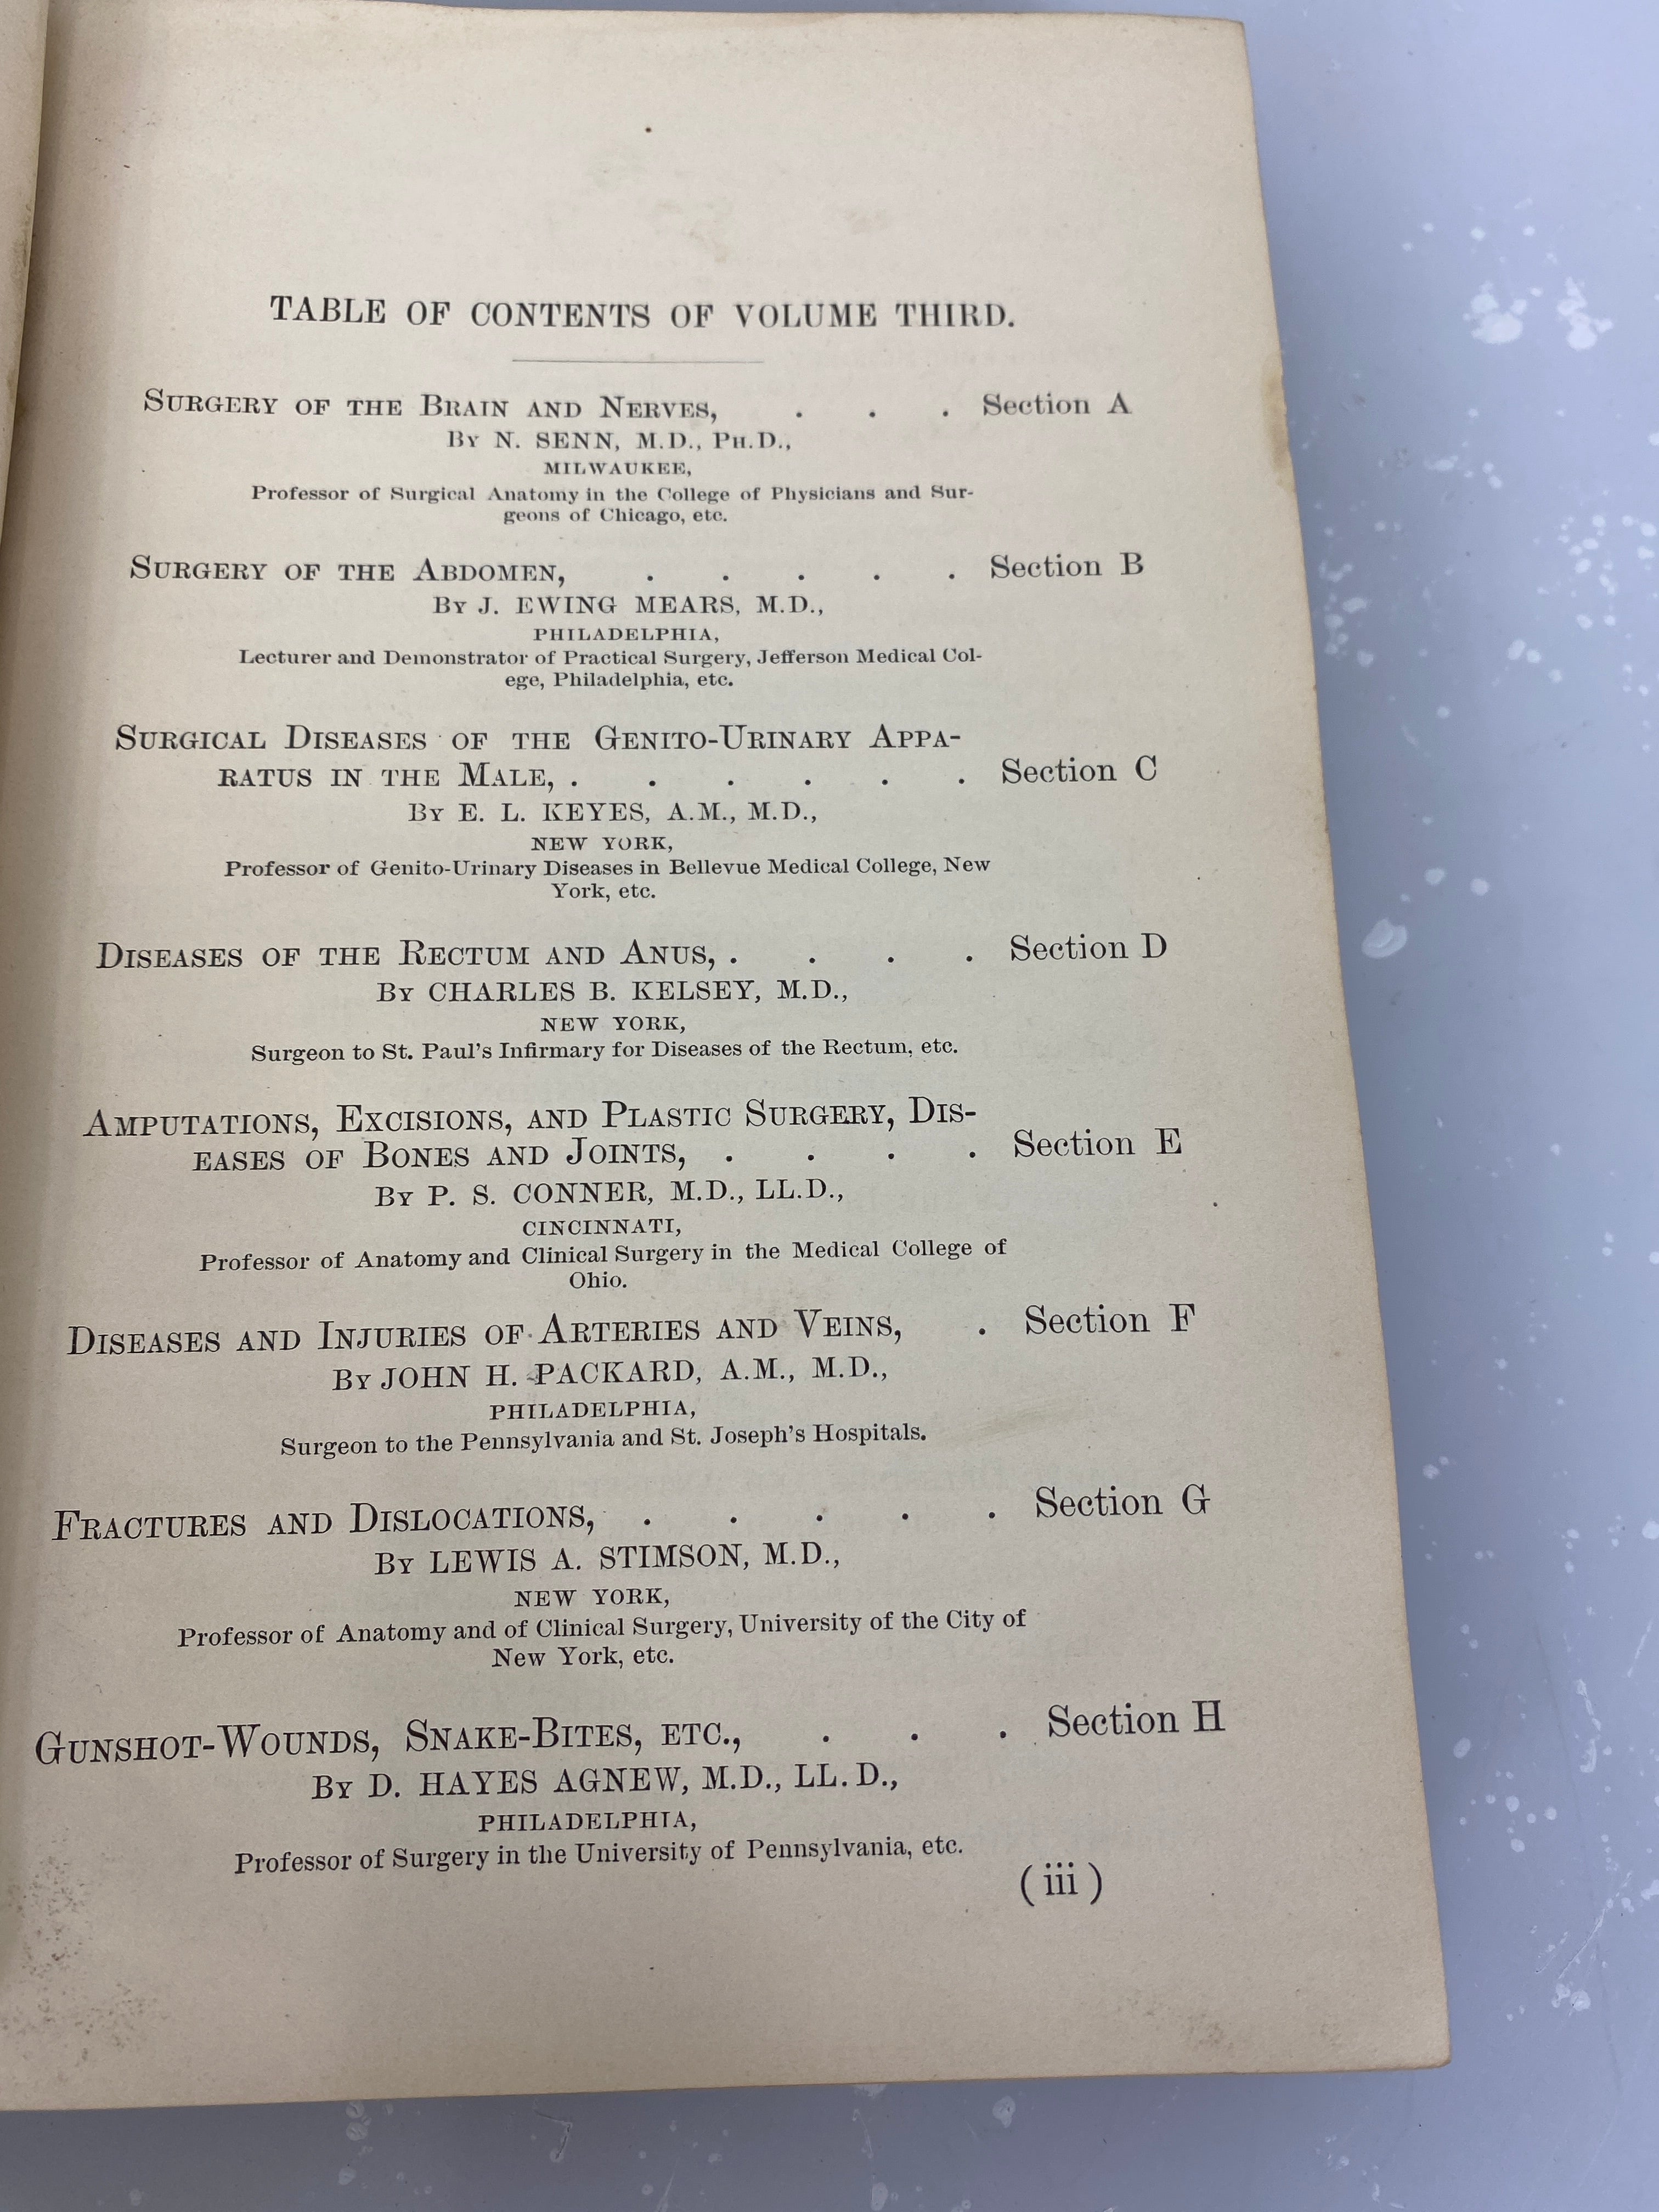 Lot of 2 Annual of the Universal Medical Sciences Vol III-IV 1889-1890 HC